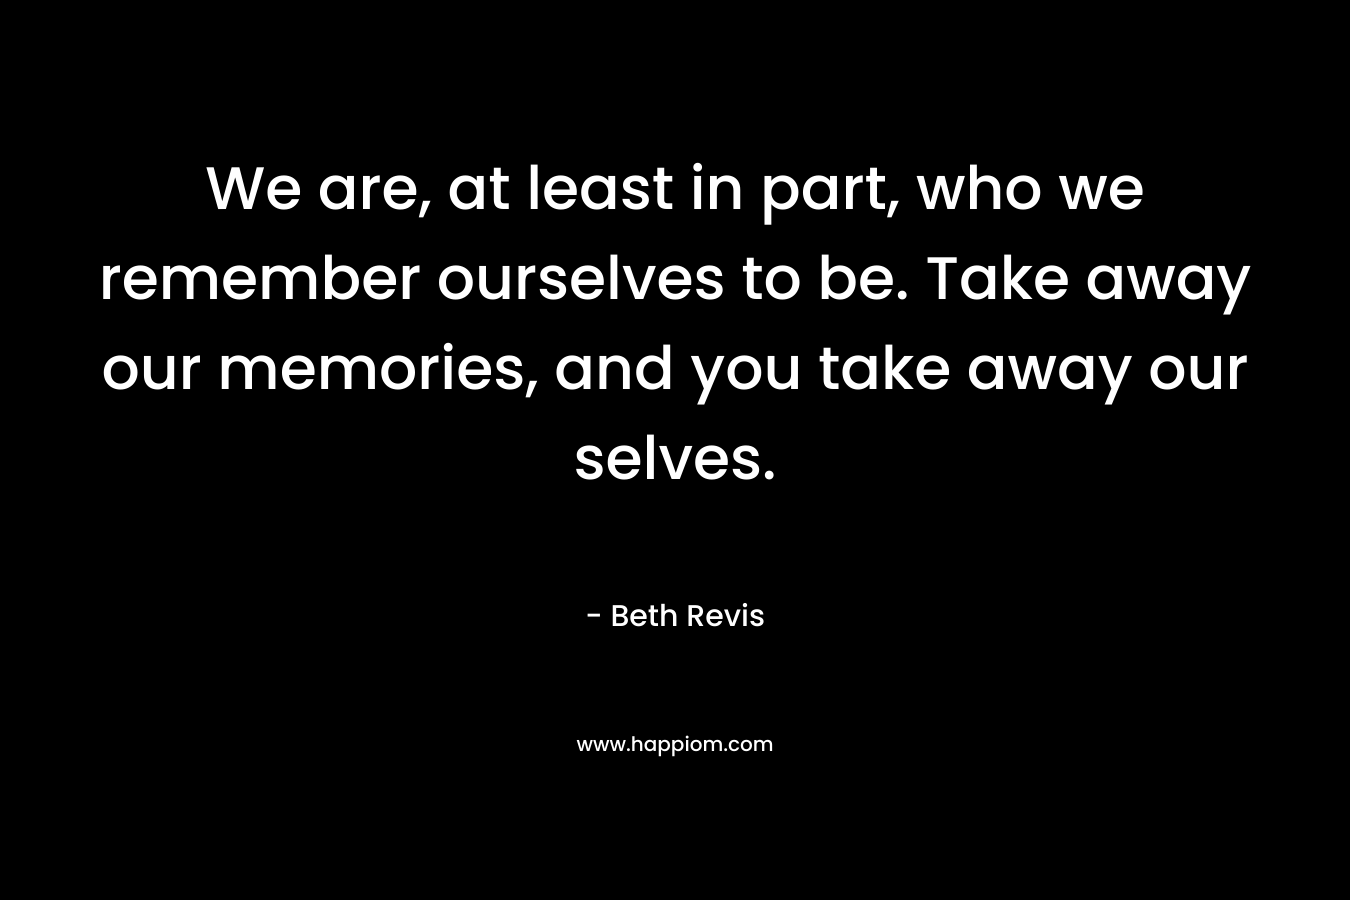 We are, at least in part, who we remember ourselves to be. Take away our memories, and you take away our selves.